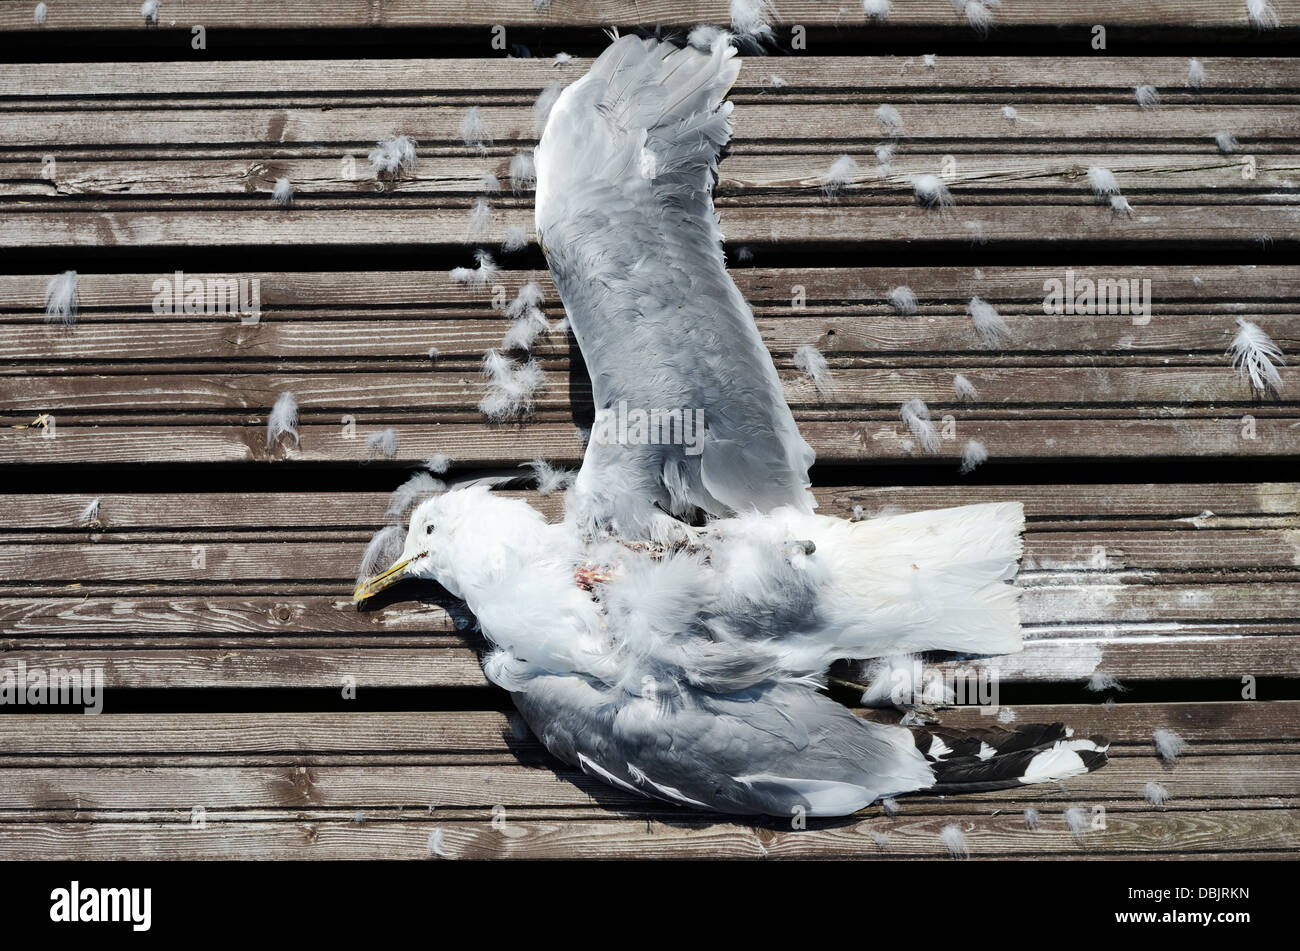 dead seagull with wings spread on a wooden pier Stock Photo